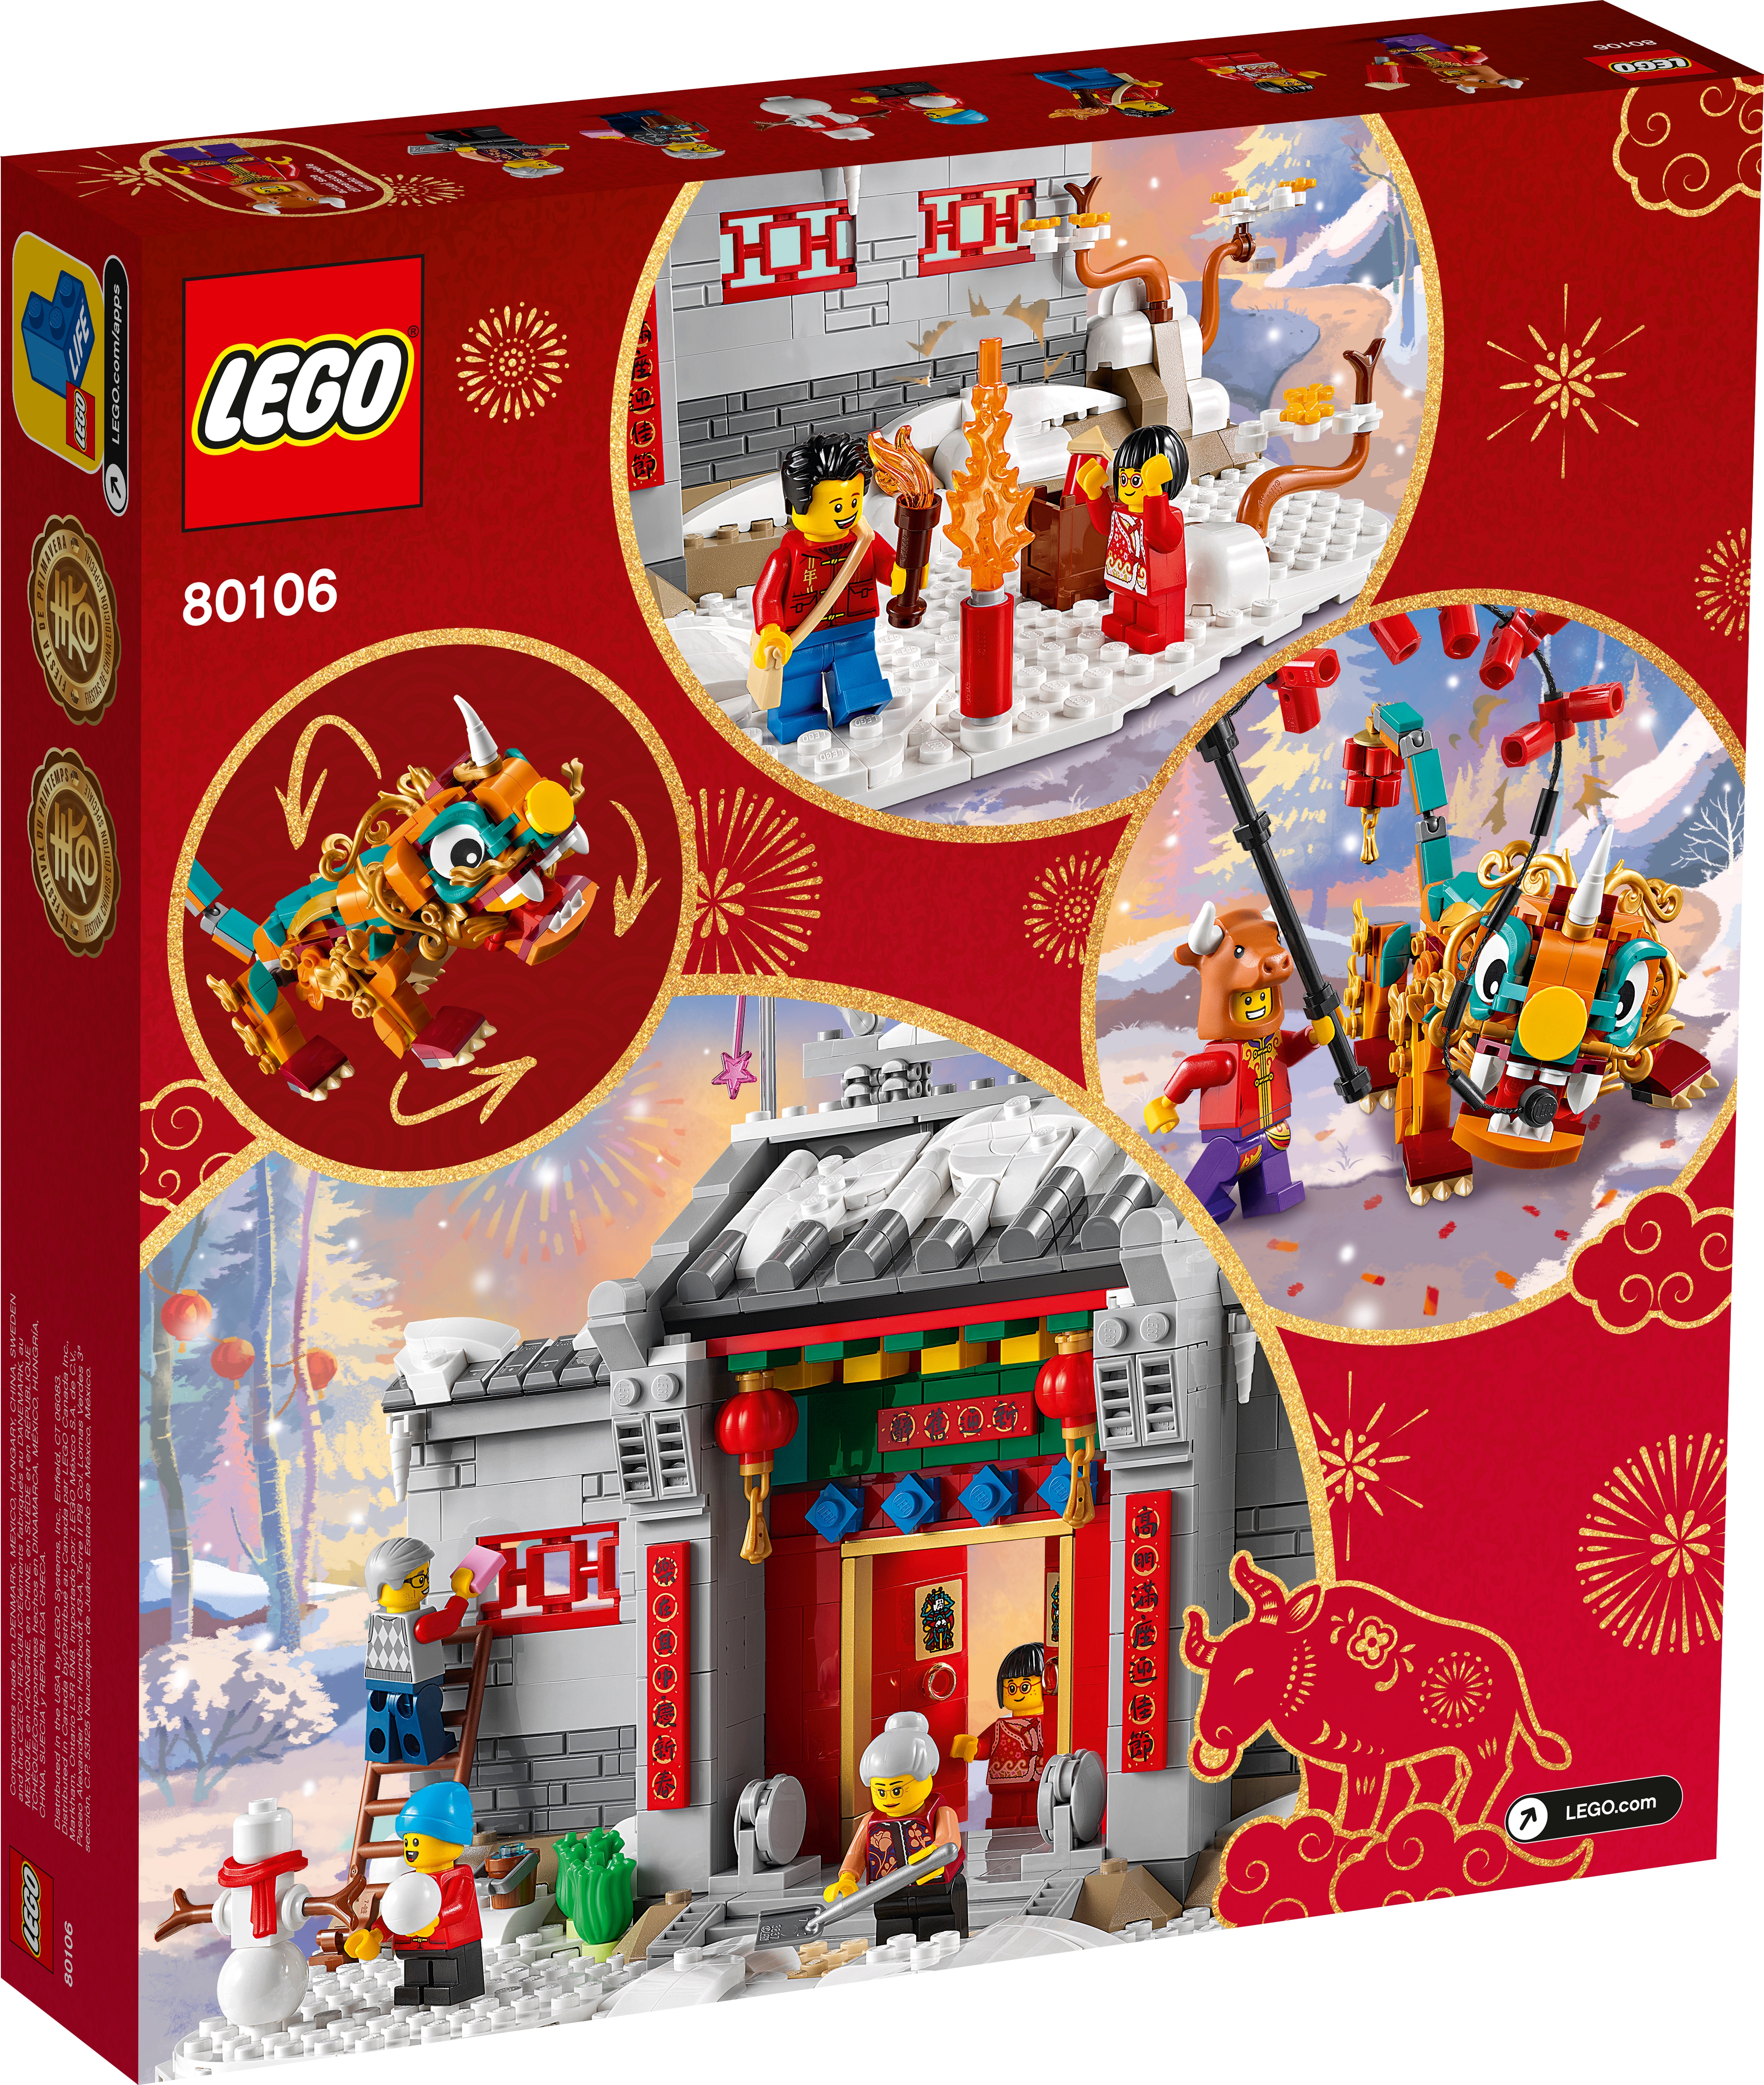 hol225 Chinese New Year 80106 NEW LEGO minifigure Father -